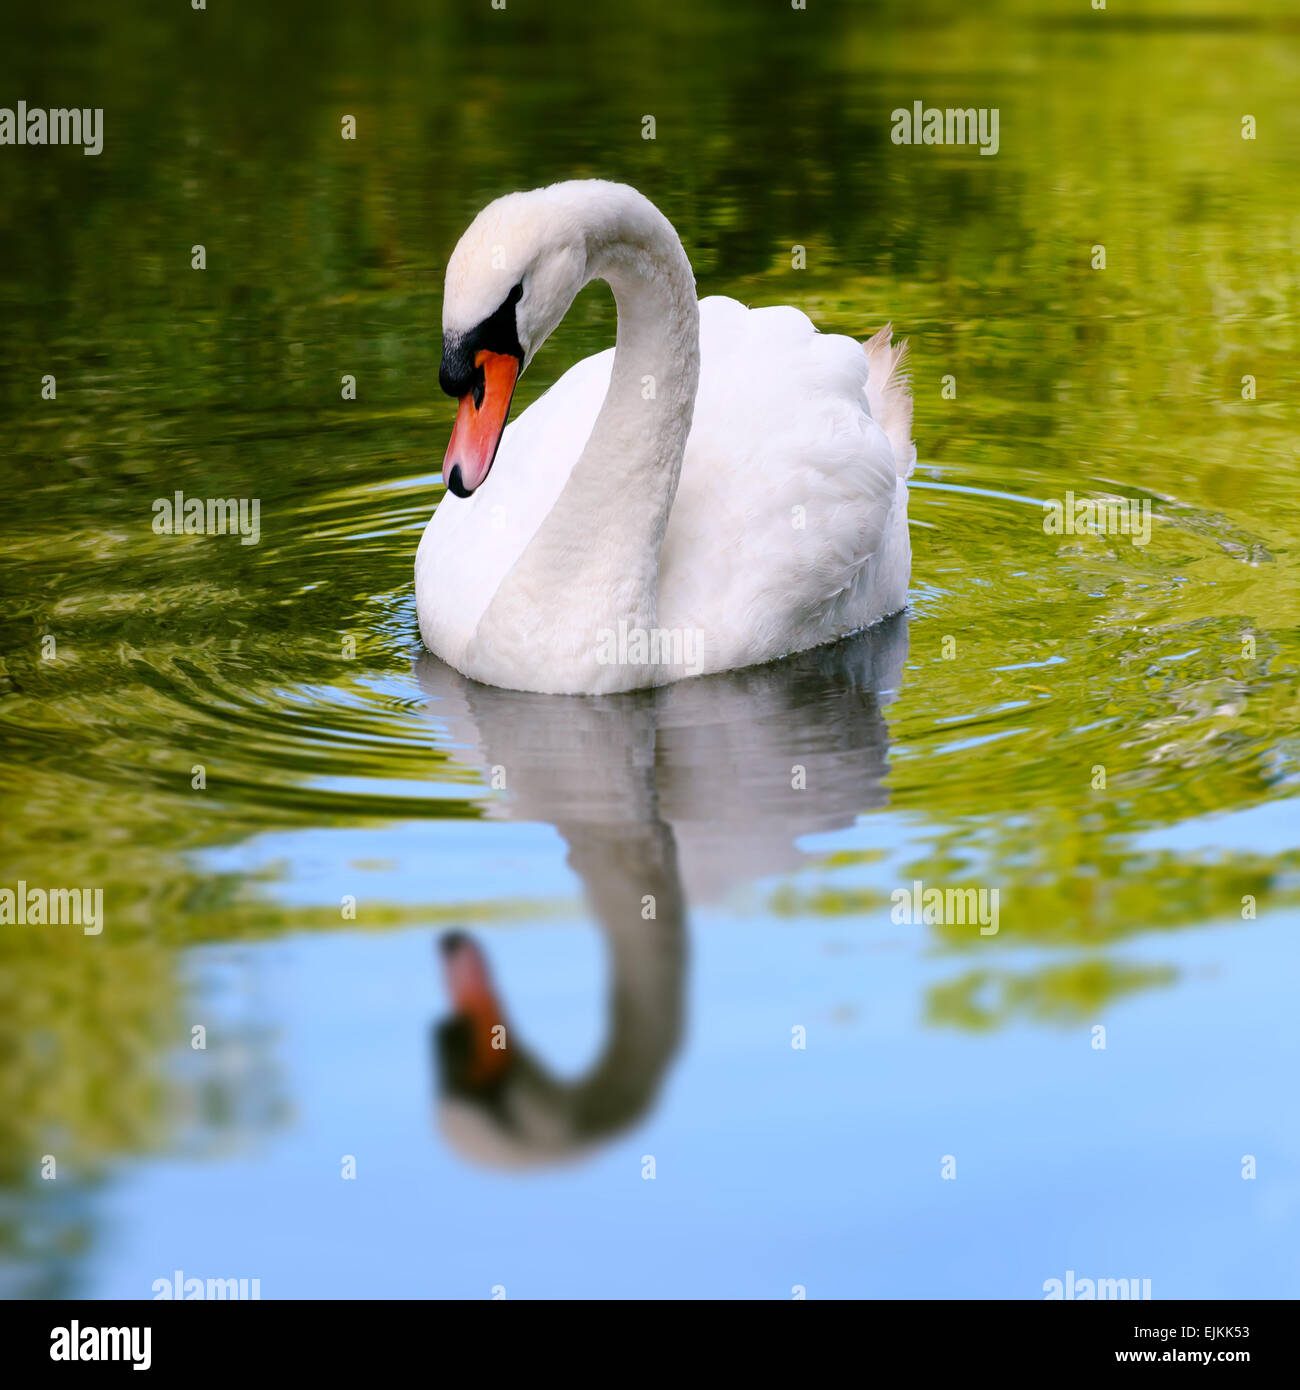 Single white swan in a lake reflective water square composition Stock Photo